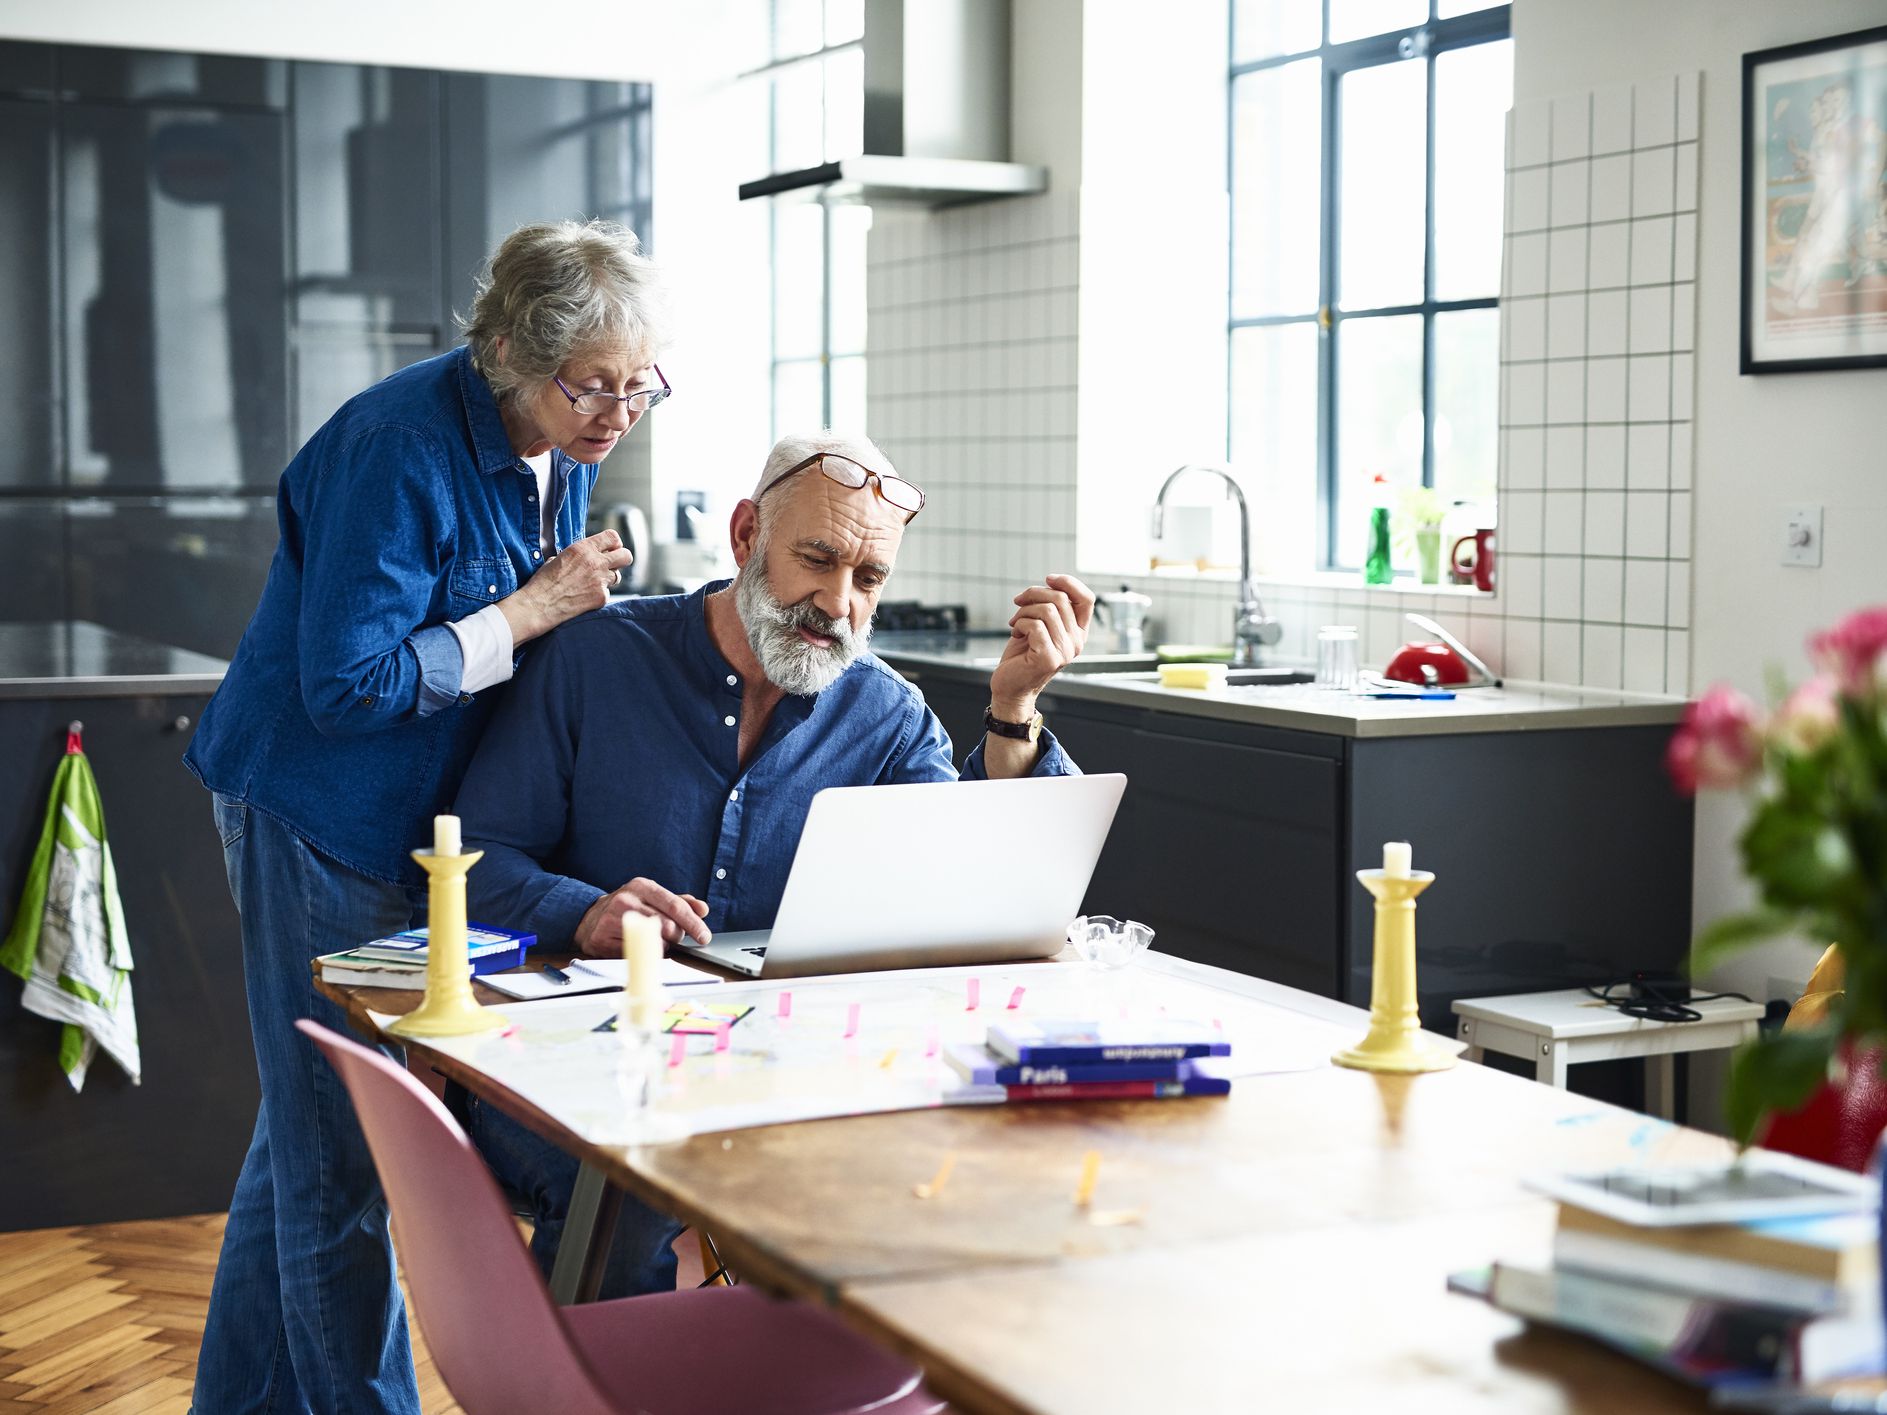 5 Jobs That You Can Do After Retirement